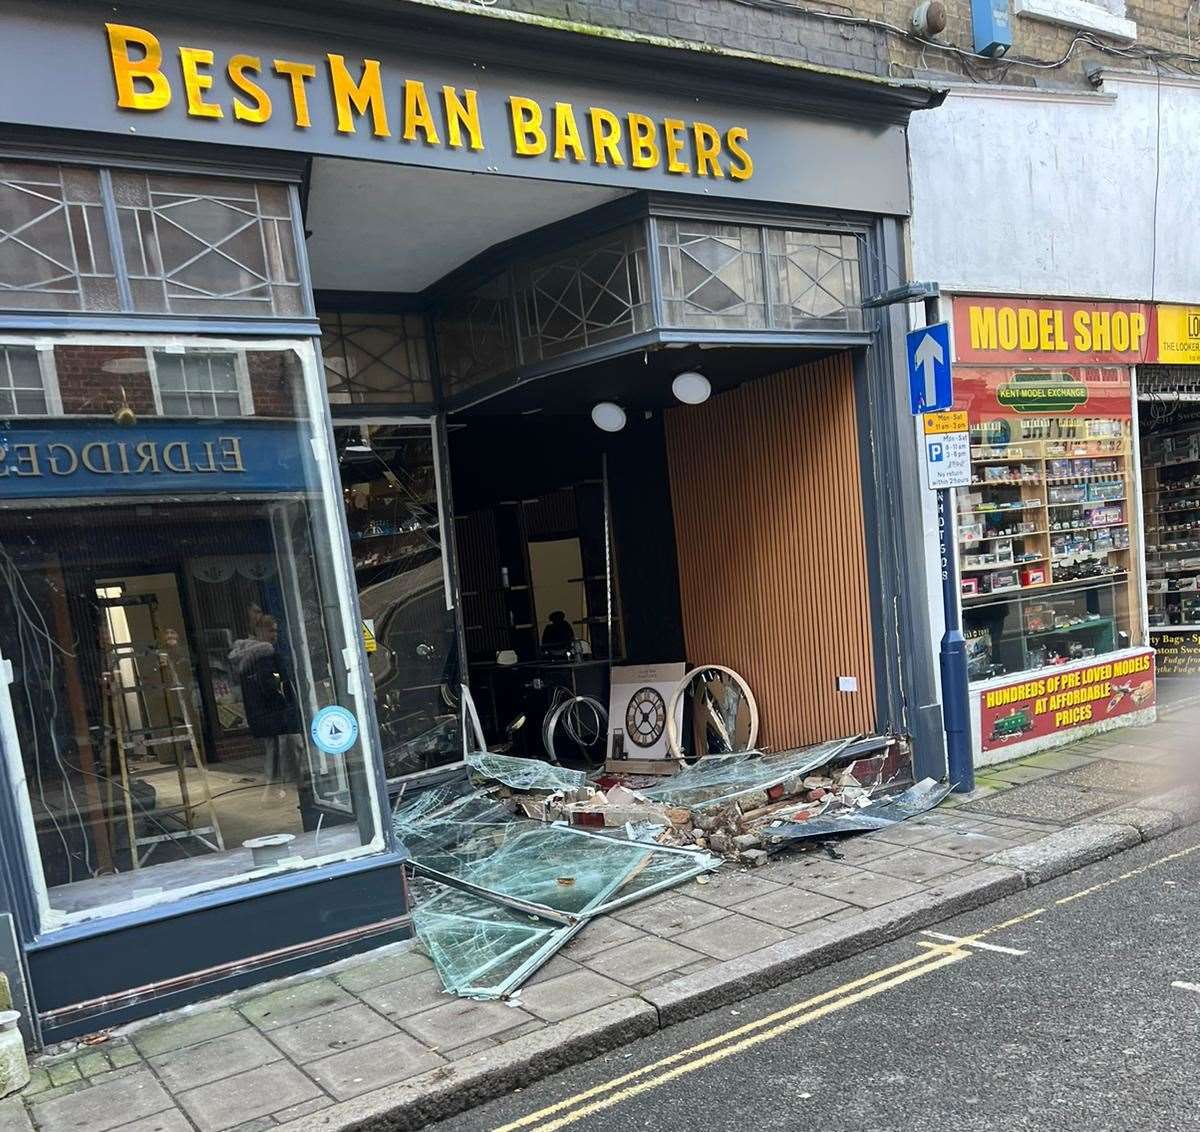 Mr Yakit estimates more than £10,000 worth of damage has been done to the building. Picture: Berkan Yakit